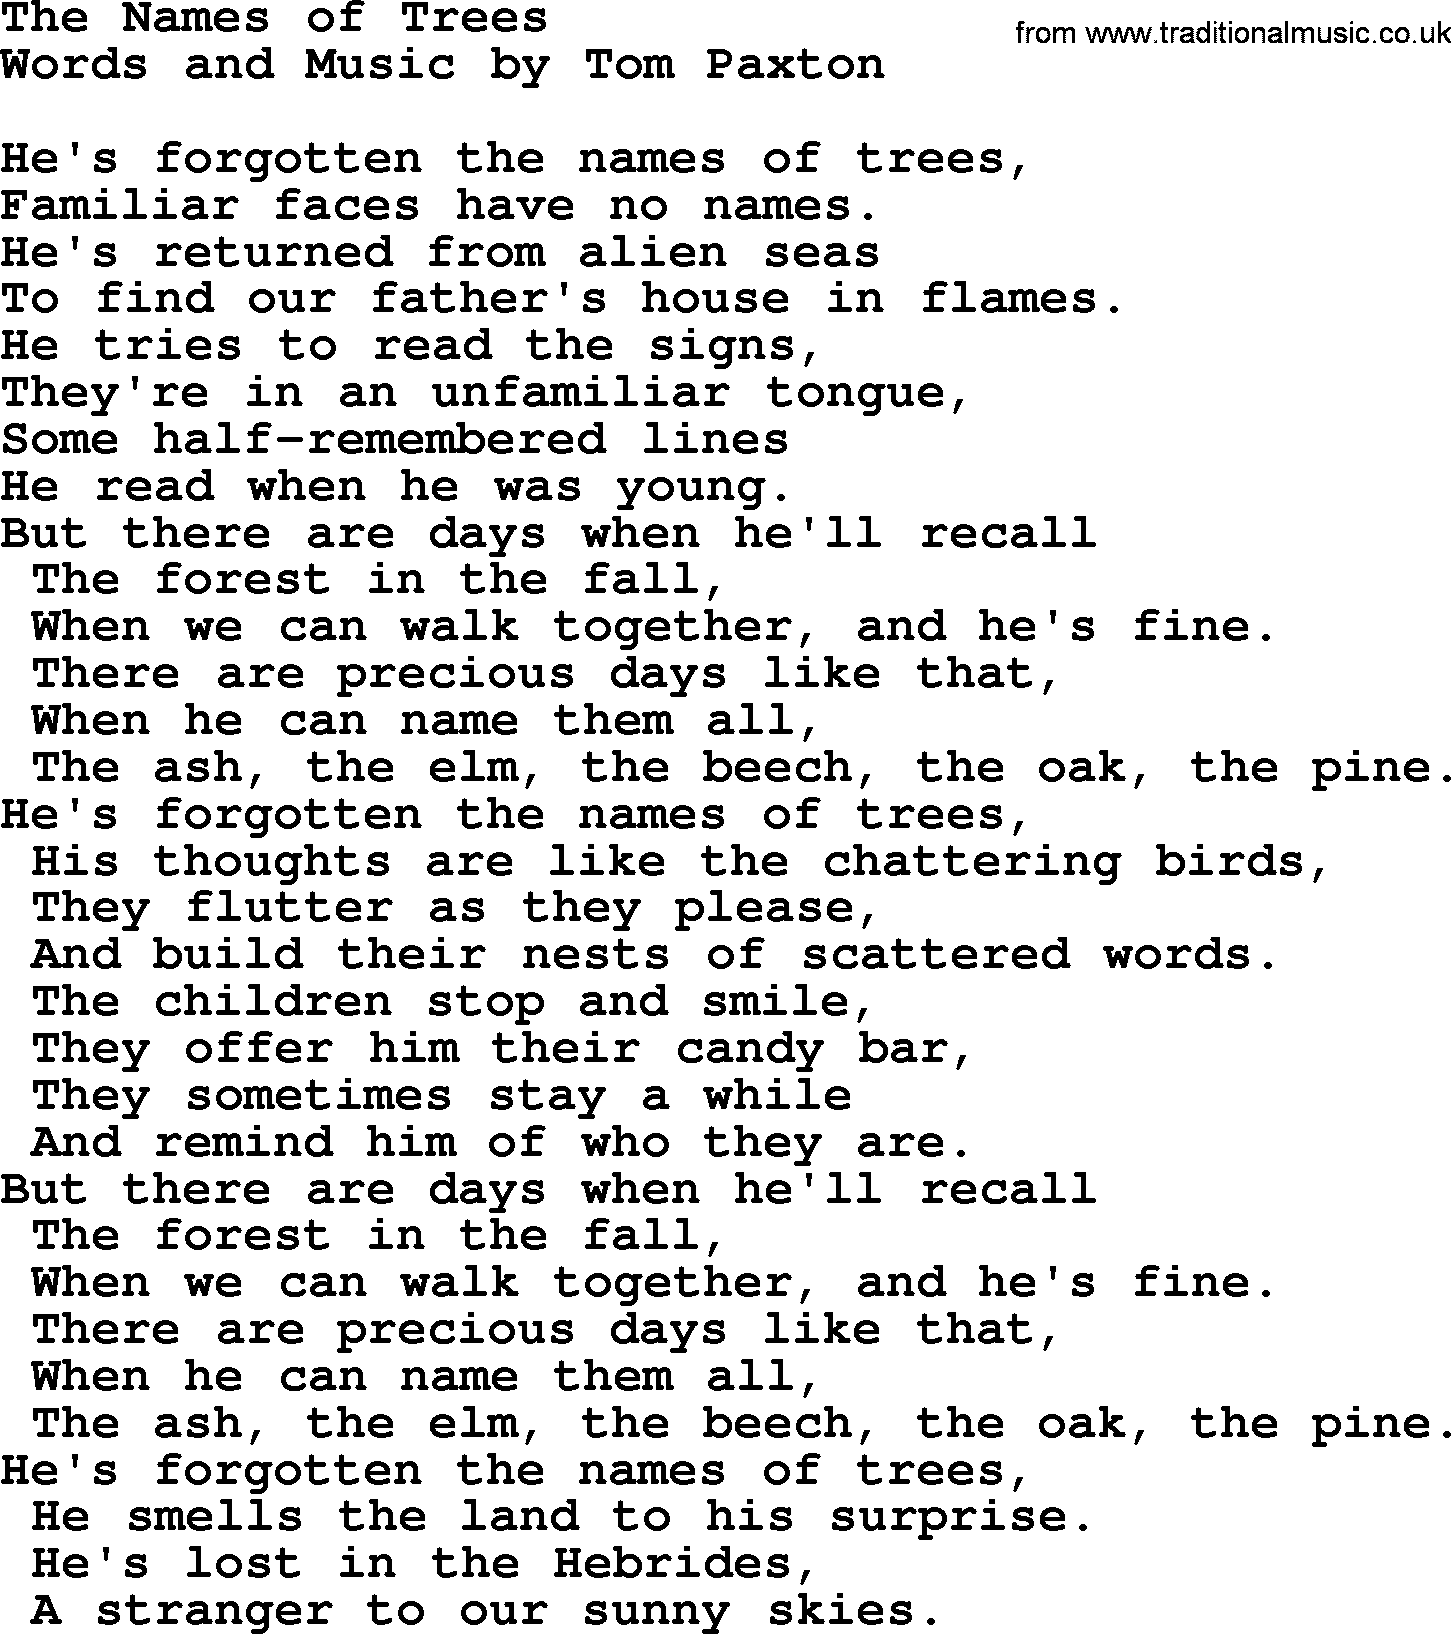 Tom Paxton song: The Names Of Trees, lyrics